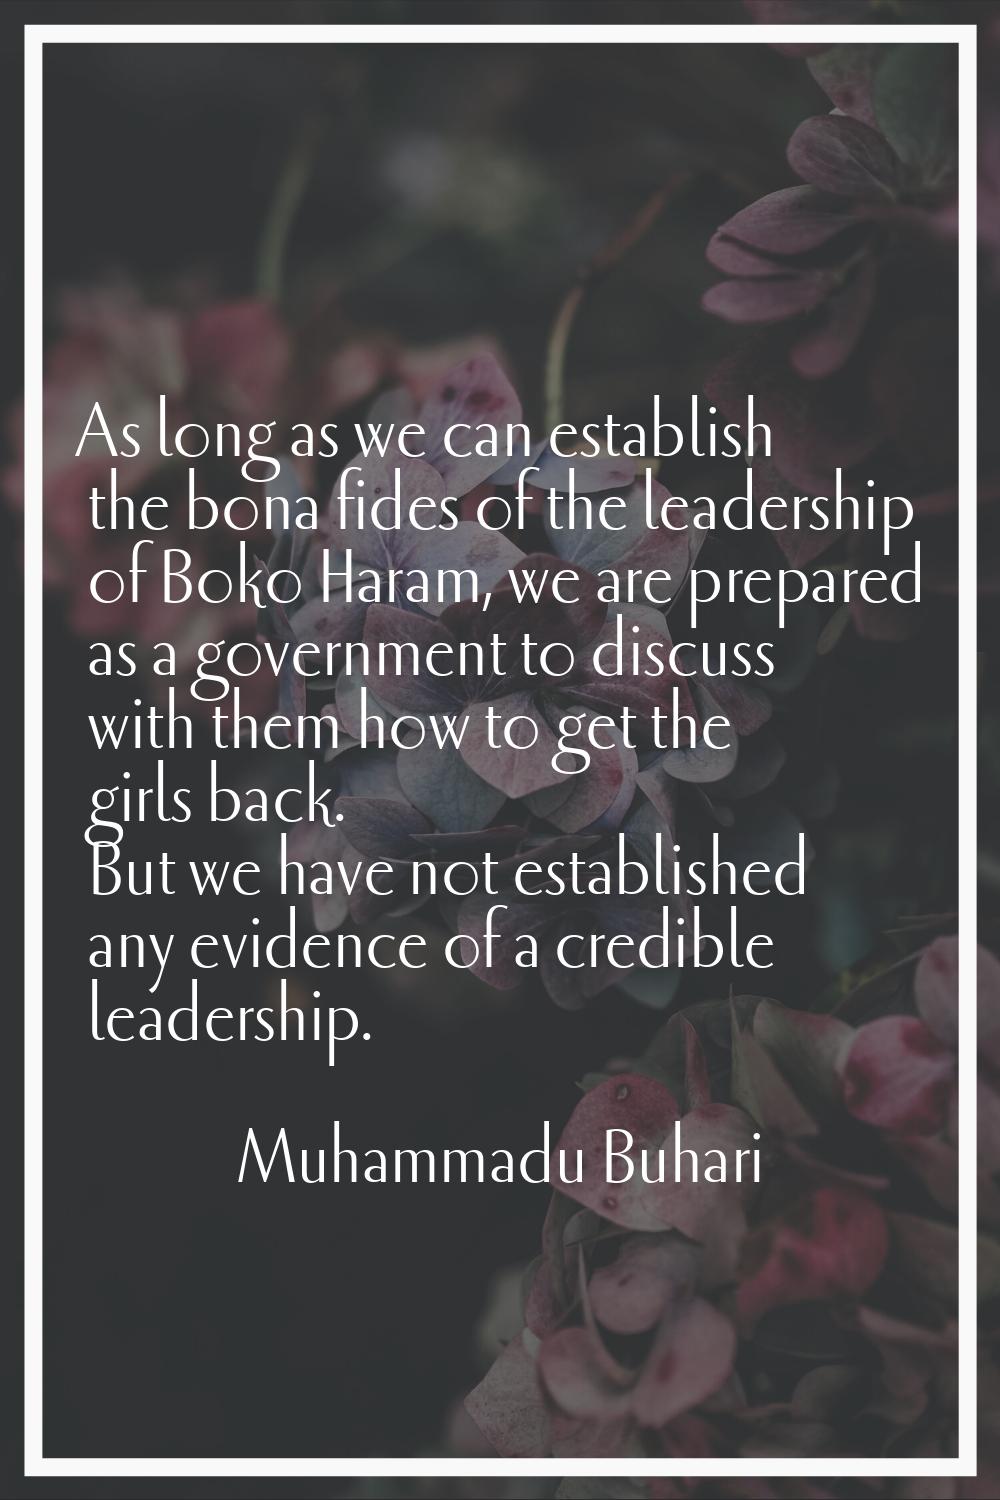 As long as we can establish the bona fides of the leadership of Boko Haram, we are prepared as a go